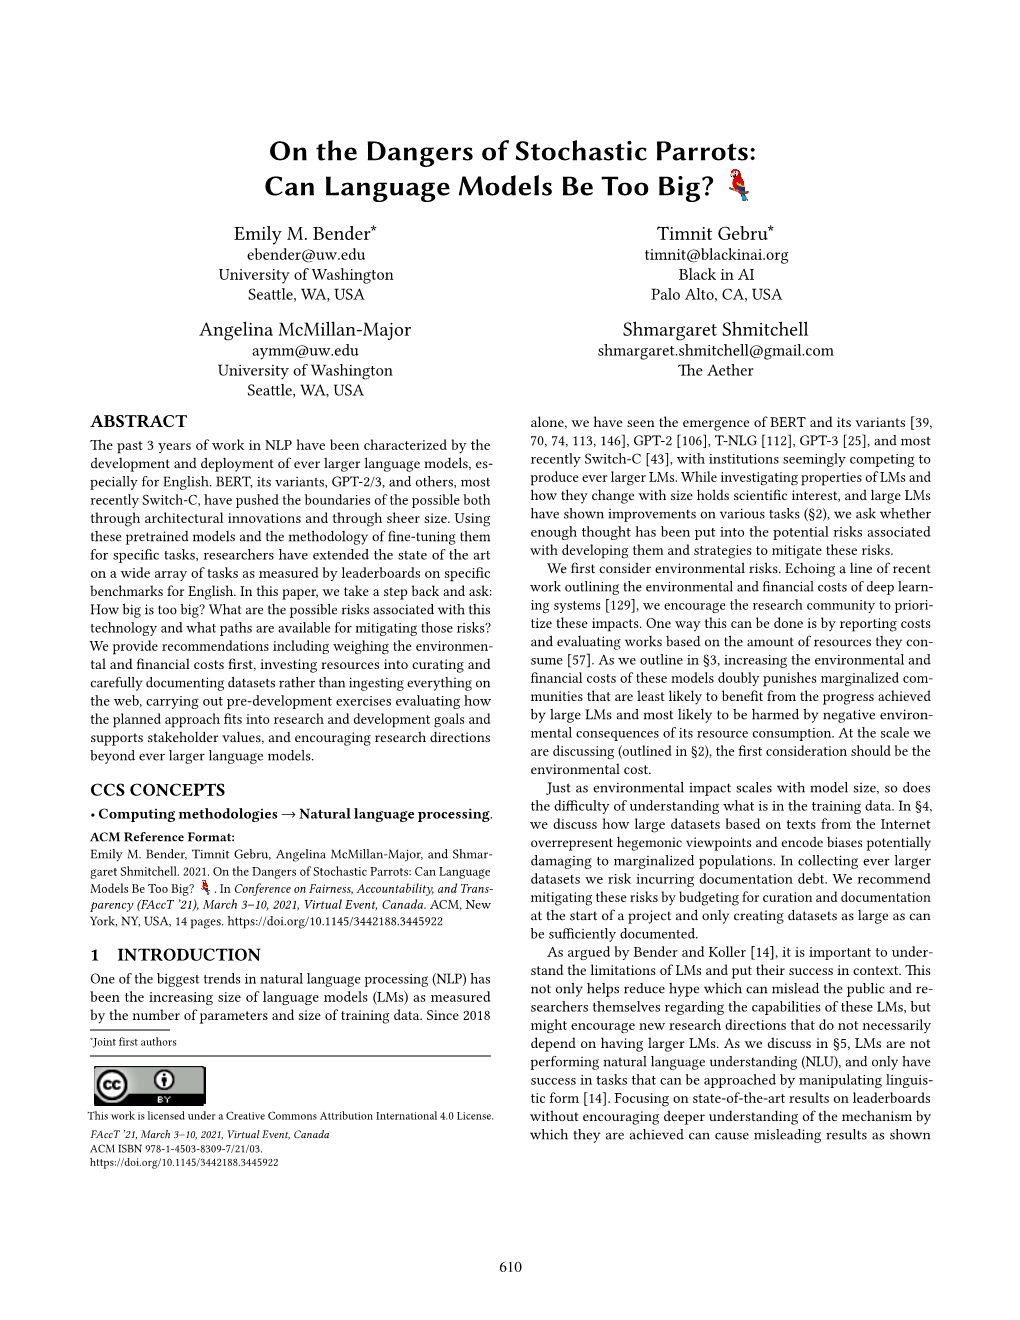 On the Dangers of Stochastic Parrots: Can Language Models Be Too Big?